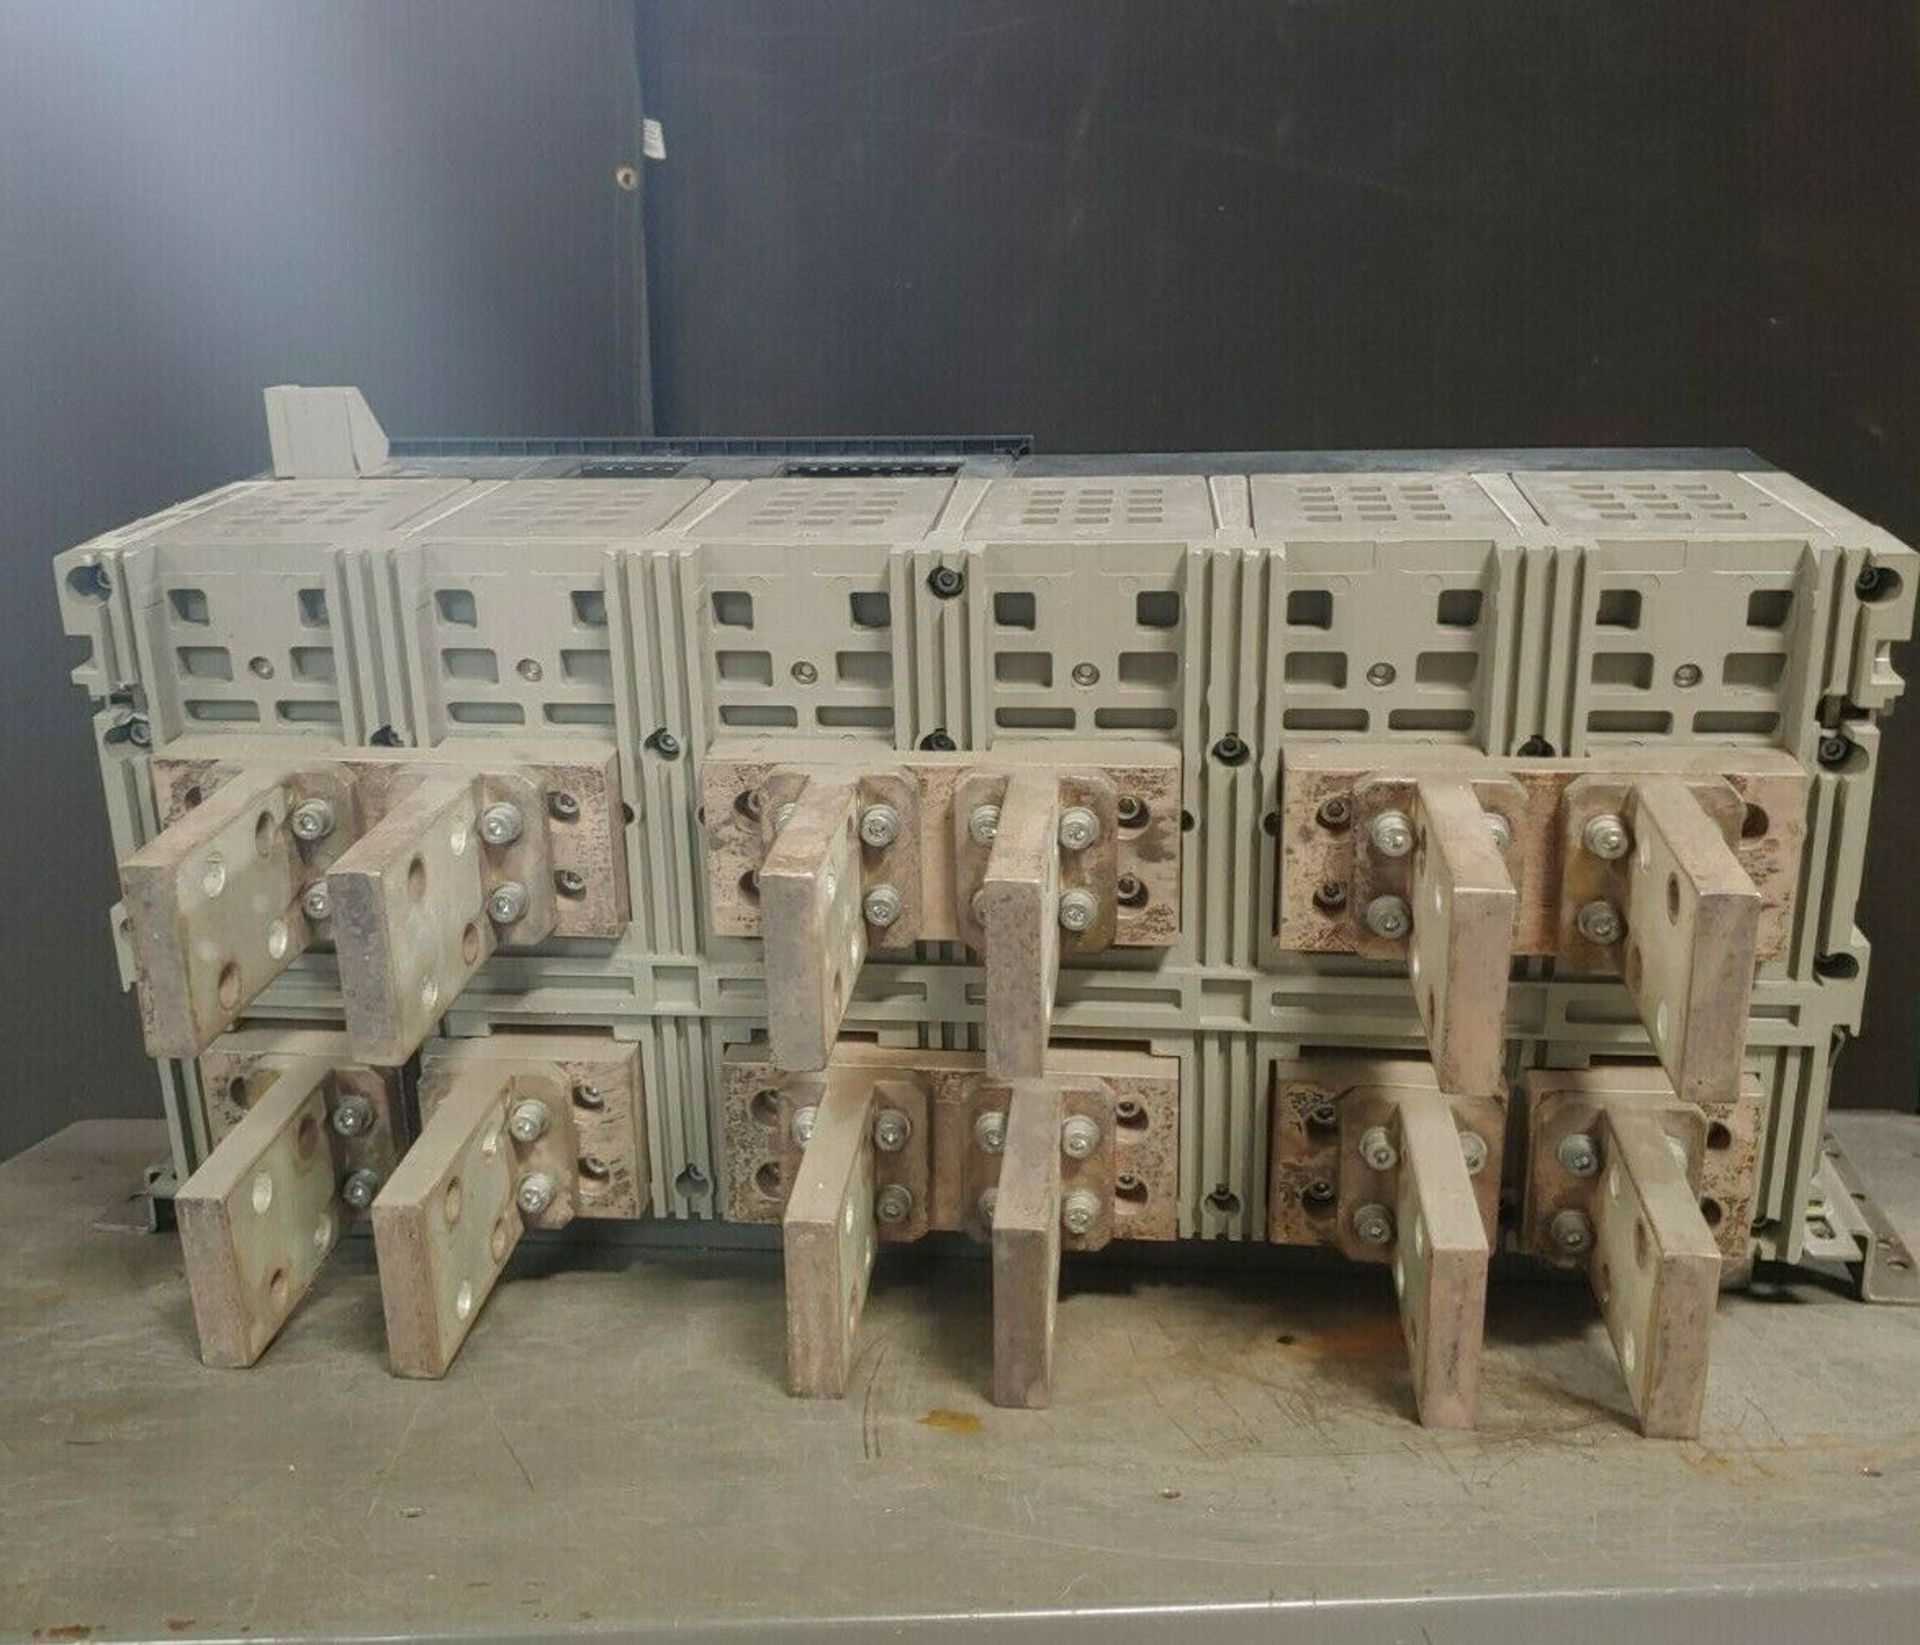 SCHNEIDER ELECTRIC CIRCUIT BREAKER MASTERPACT NW50H2 - 5000 A - 3 POLES - DRAWOUT - Image 7 of 7